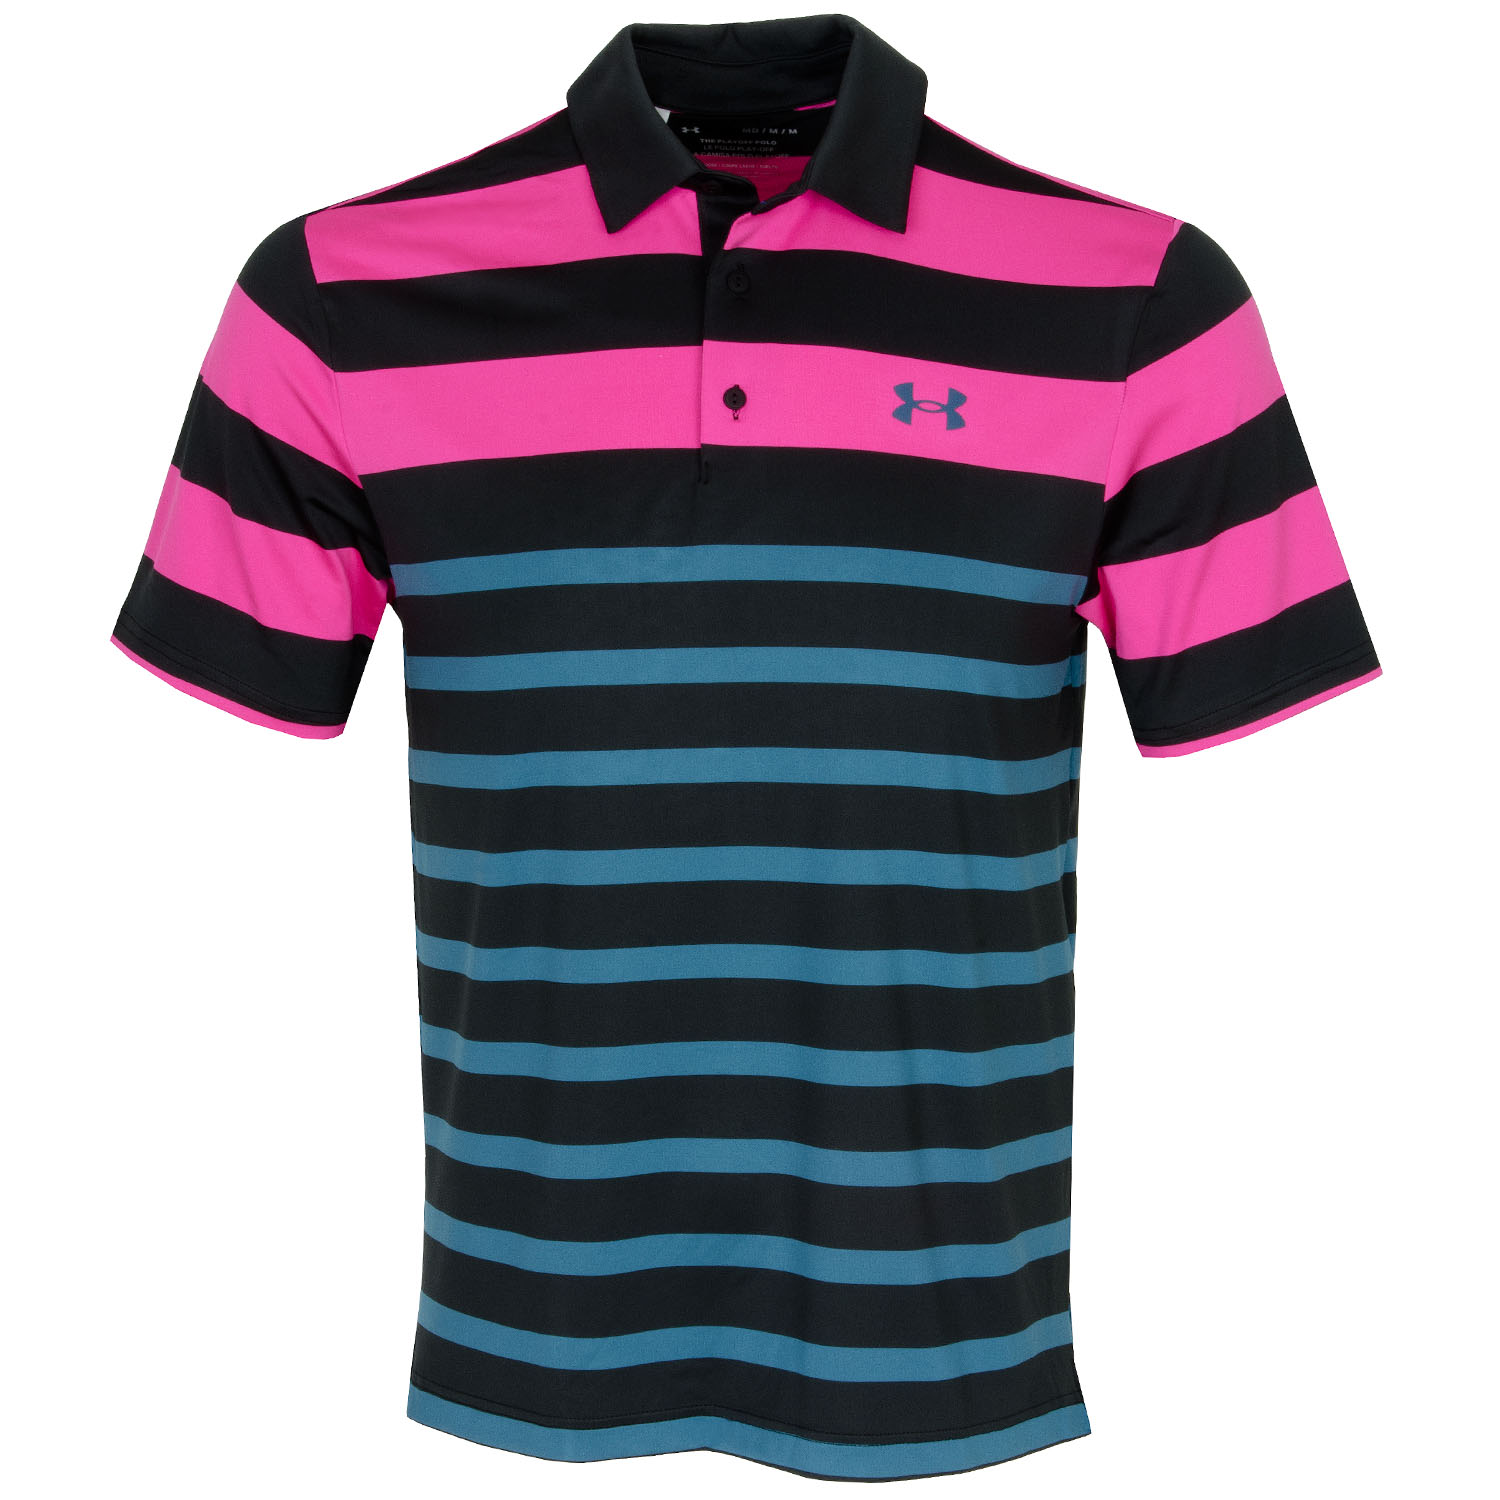 Under Armour Playoff 3.0 Rugby Stripe Golf Polo Shirt